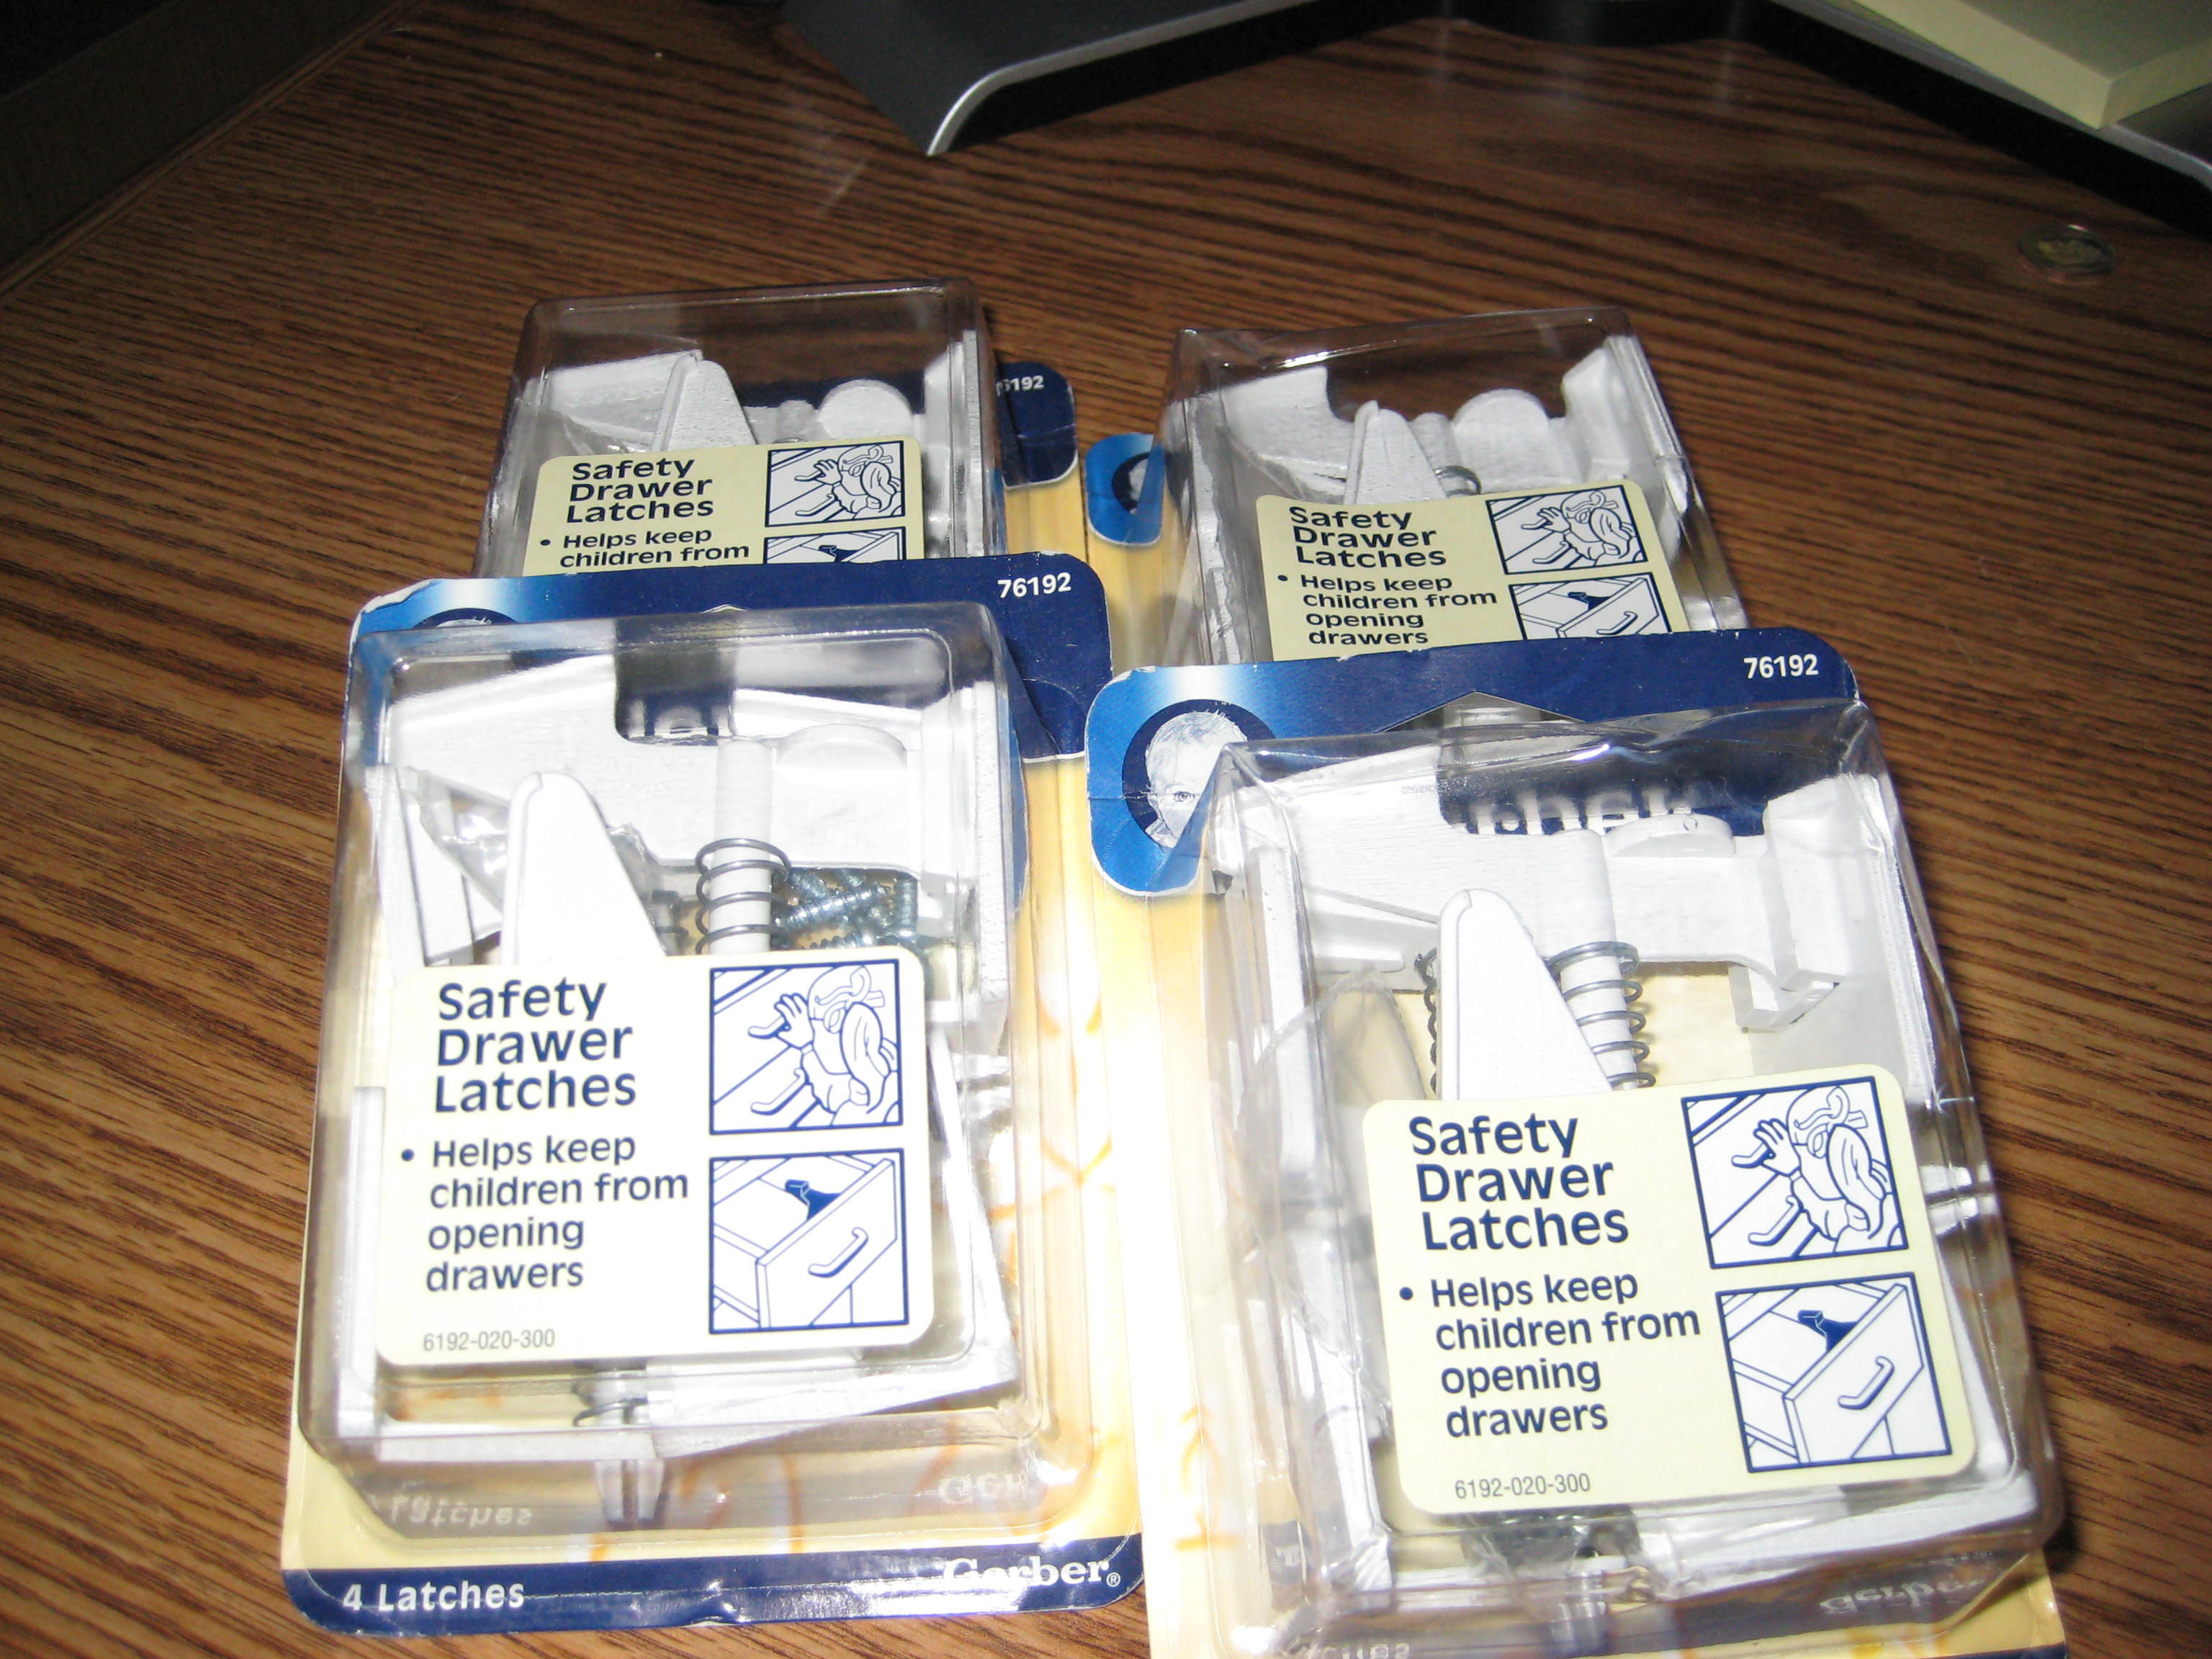 Gerber Safety Drawer Latches - 4 boxes